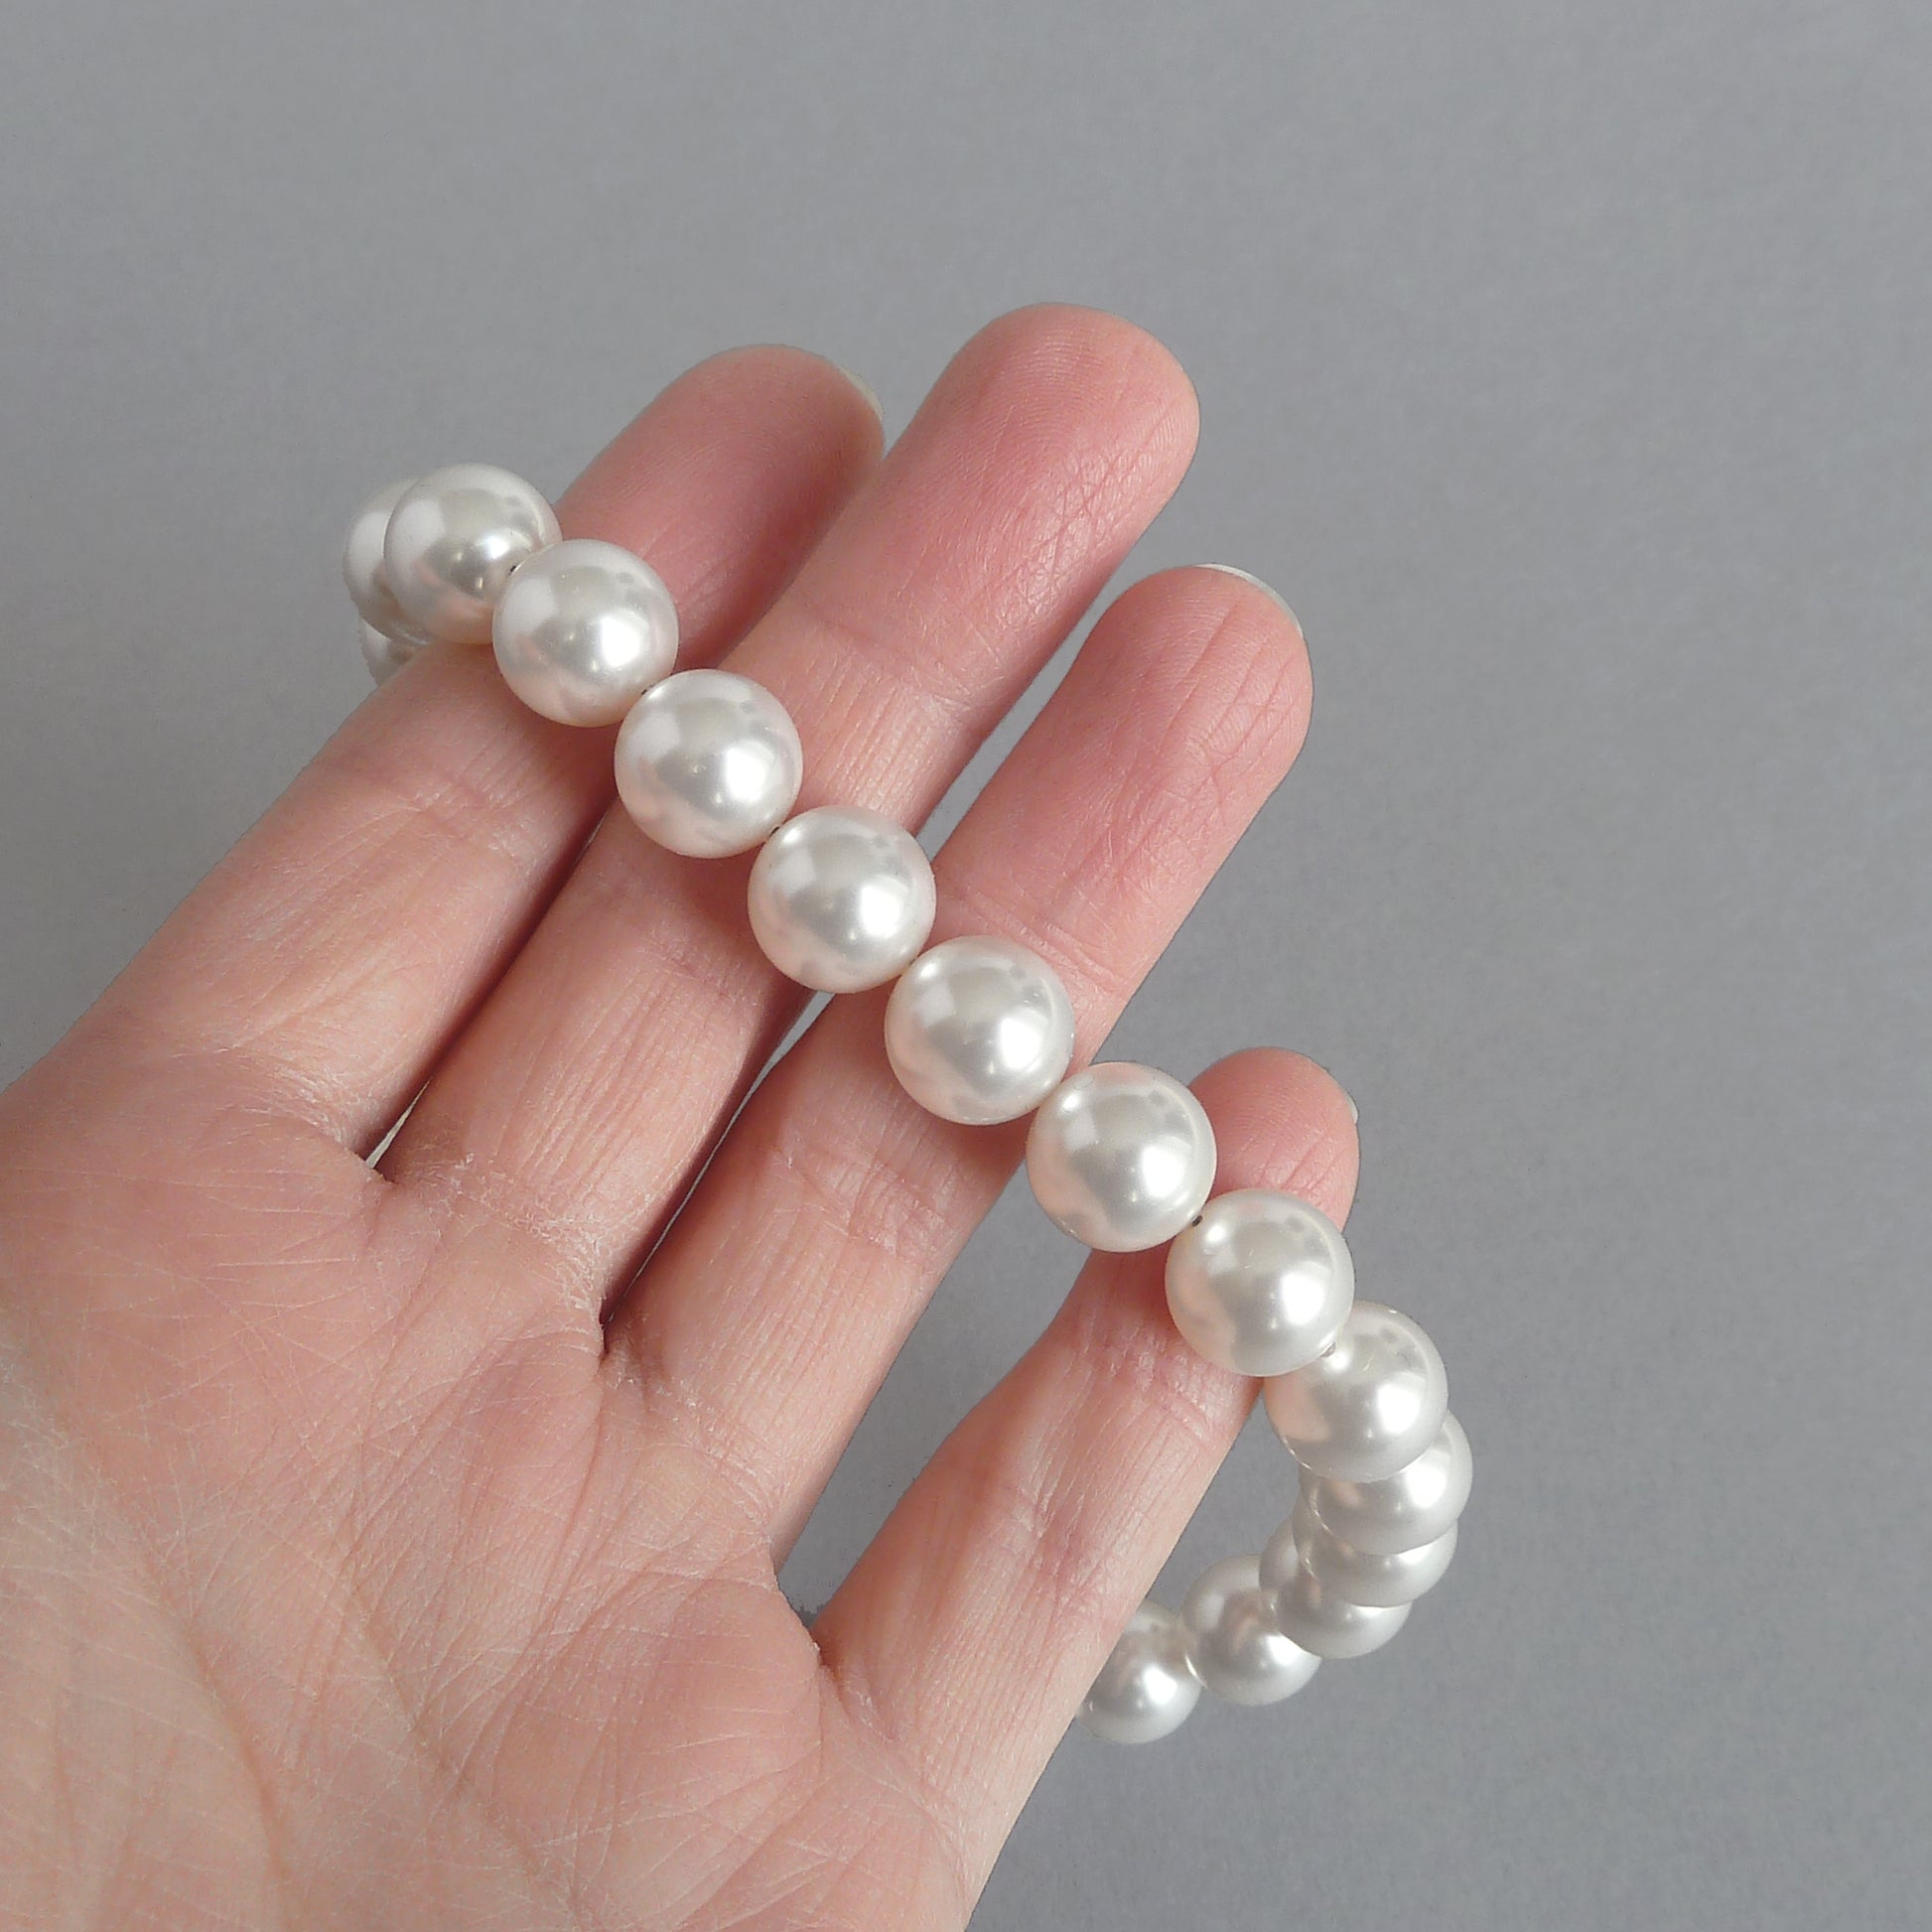 Chunky white pearl necklaces for weddings